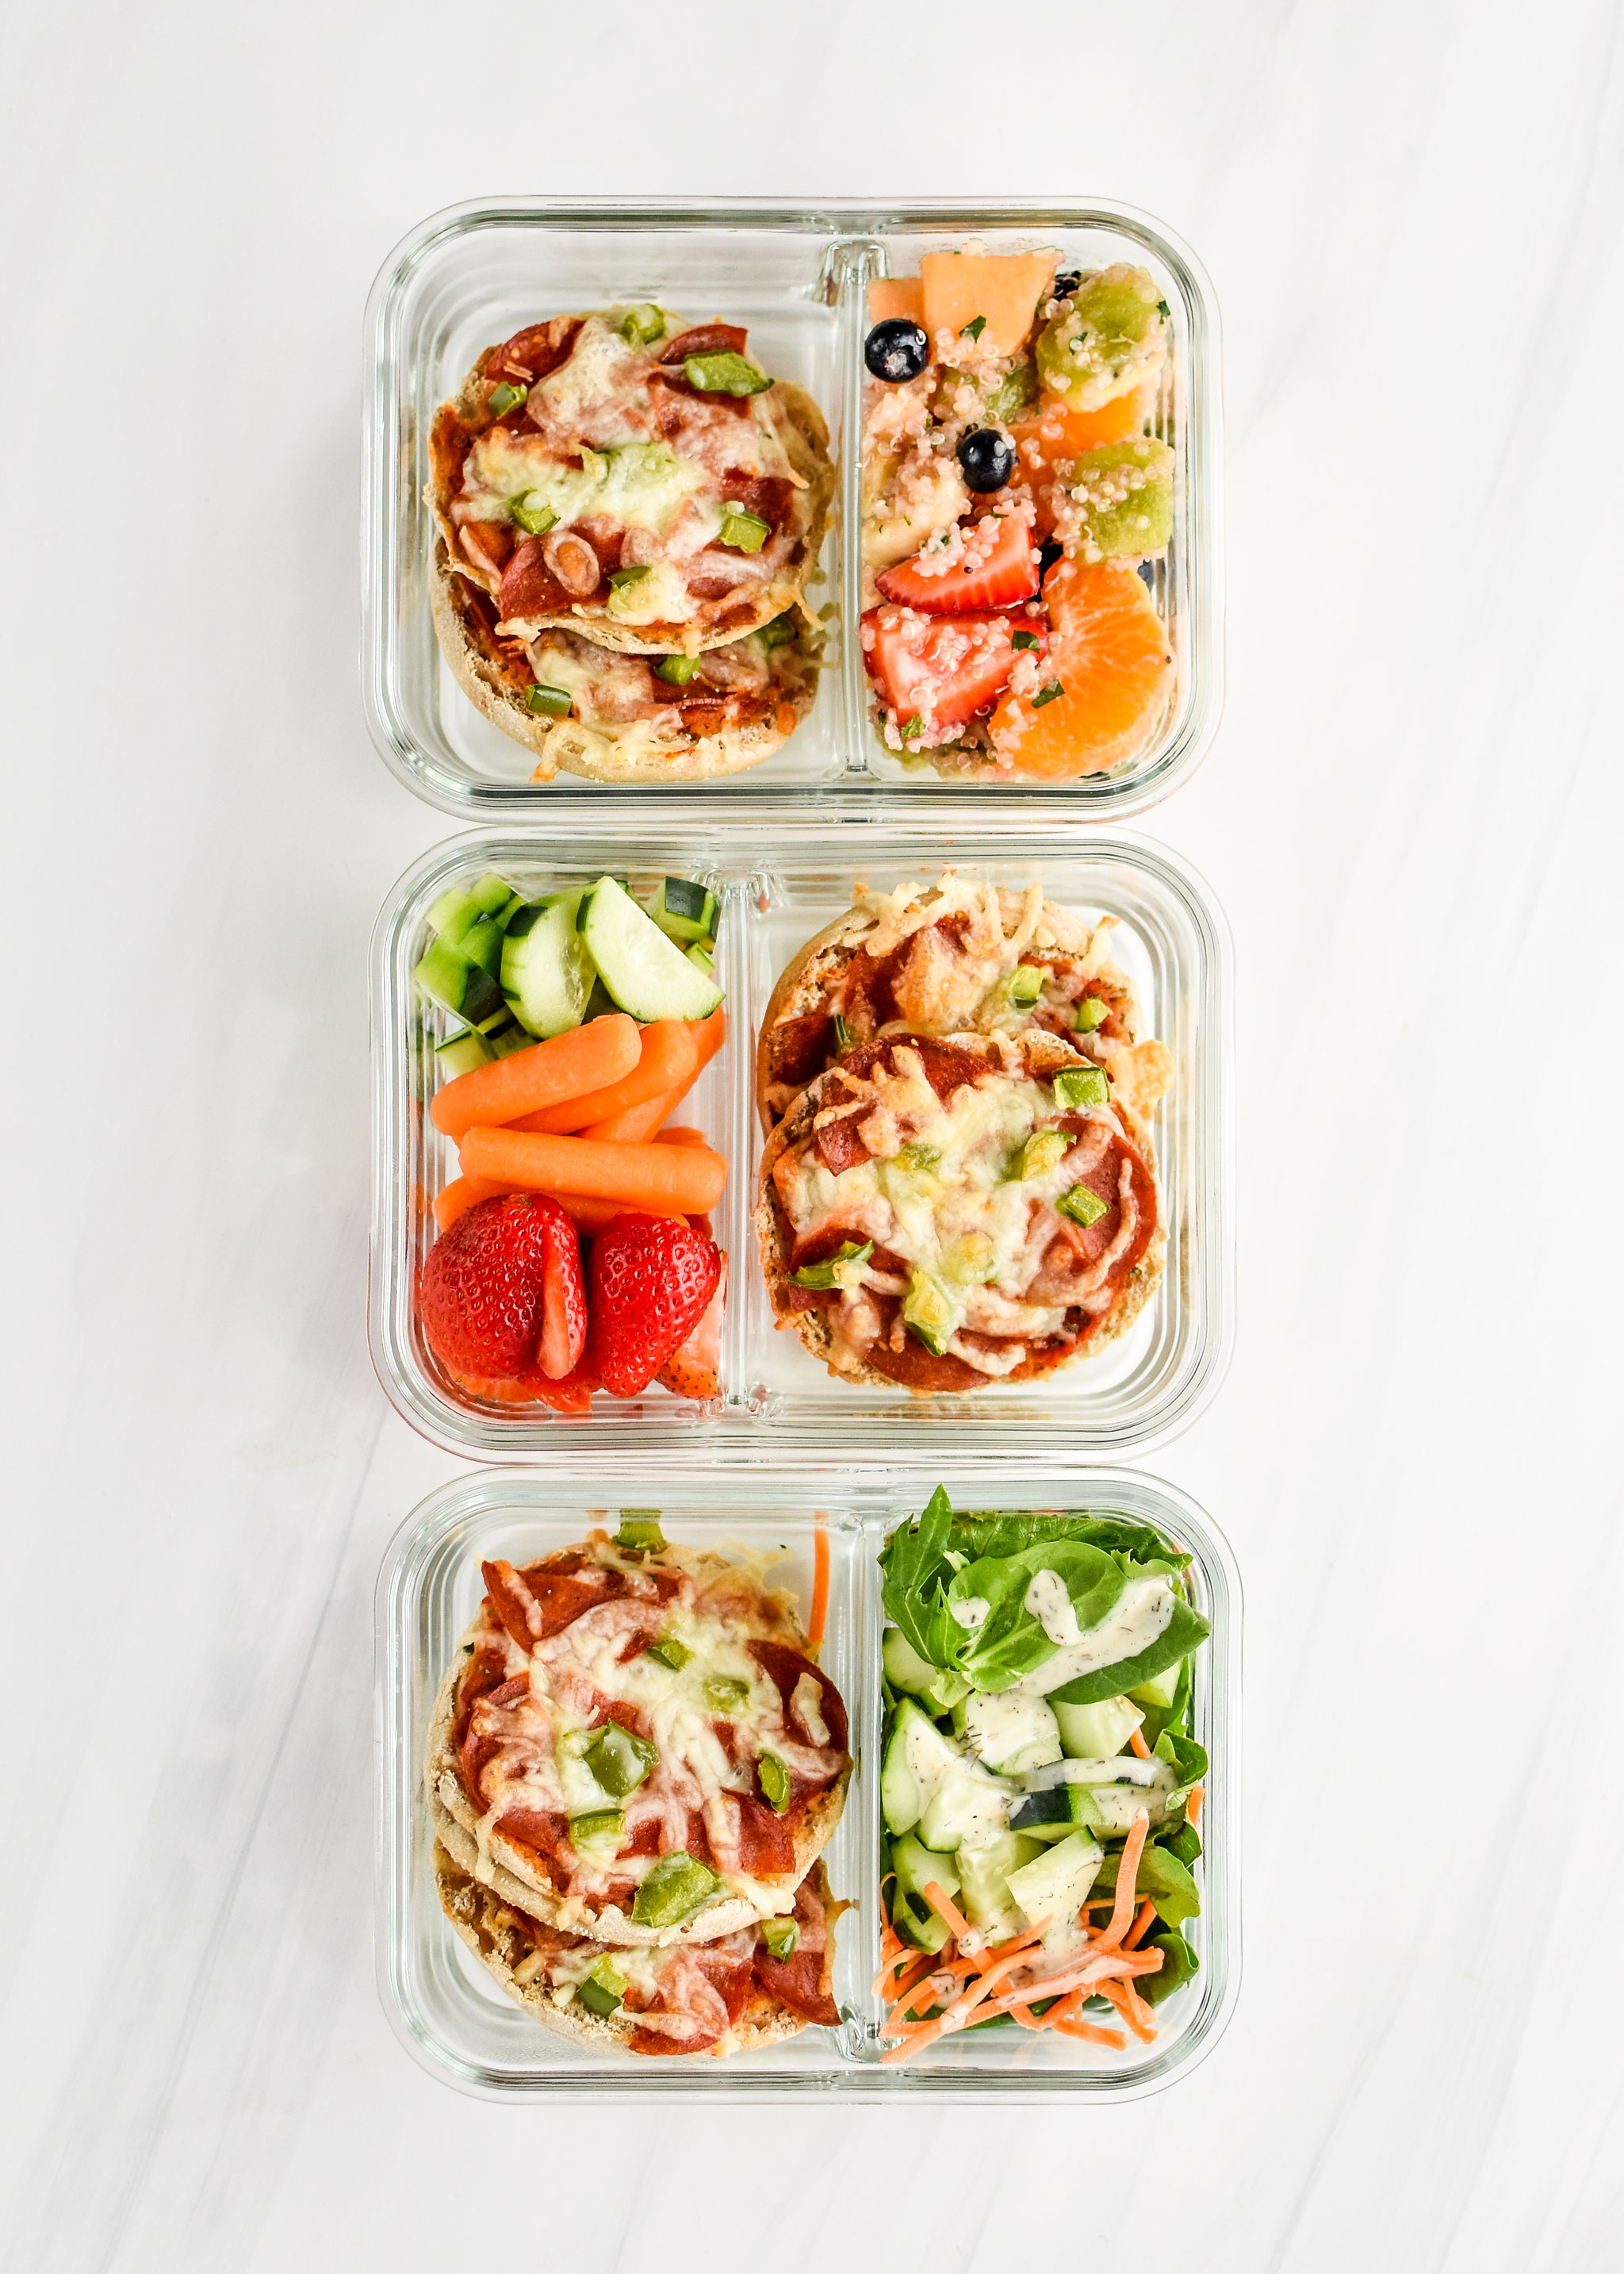 English muffin mini pizzas pictured in meal prep containers with fresh produce or salads.